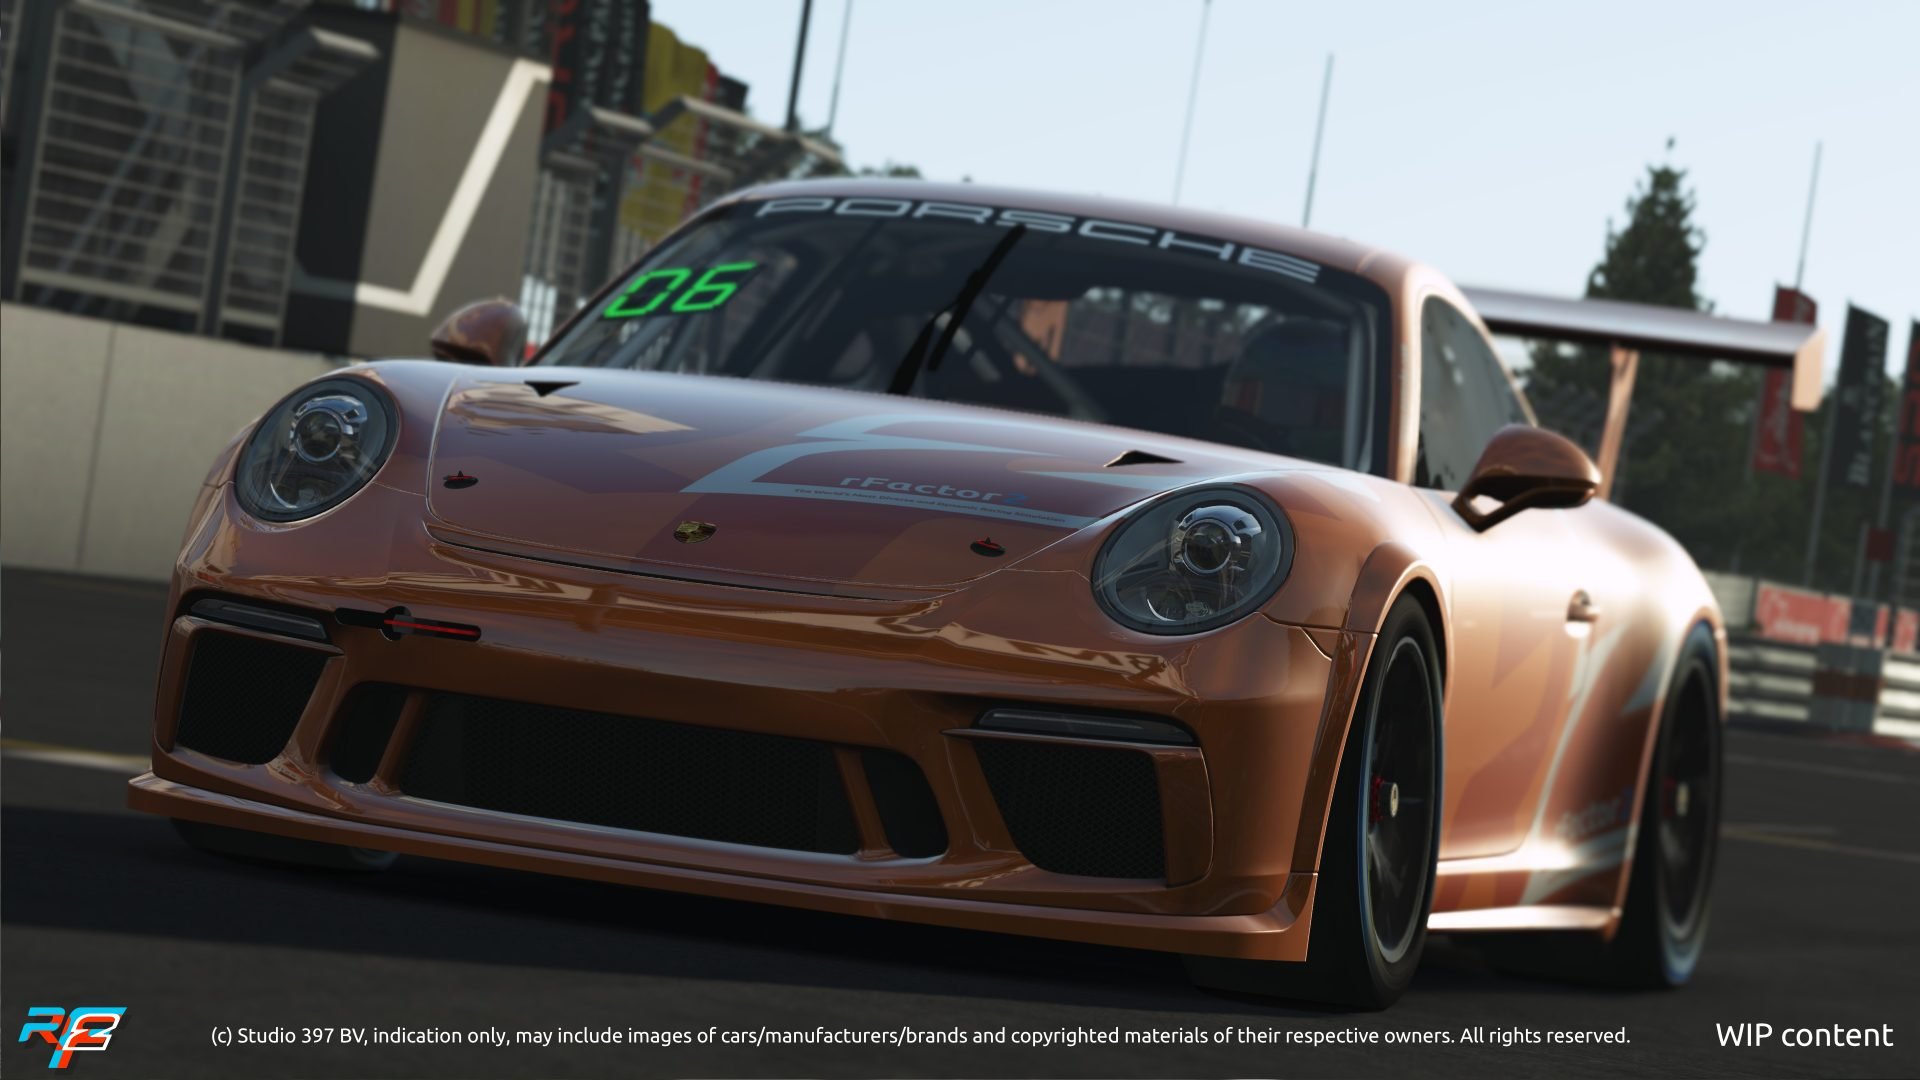 More information about "rFactor 2: Roadmap Update Agosto 2019, Porsche Cup in pista!"